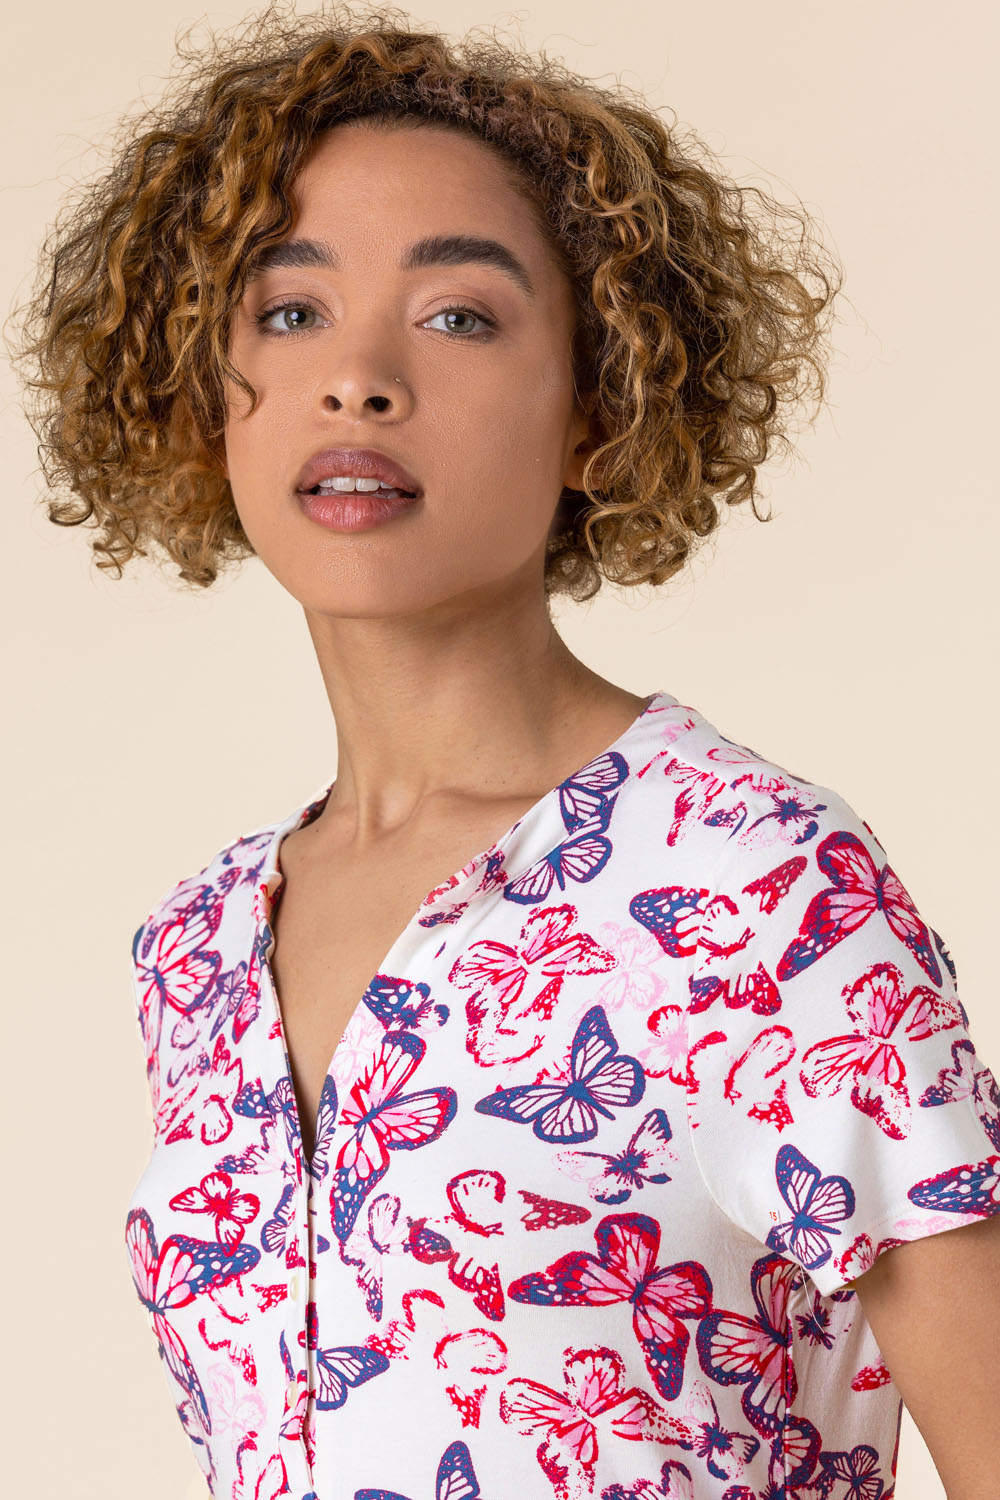 PINK Butterfly Print Button Top, Image 5 of 5